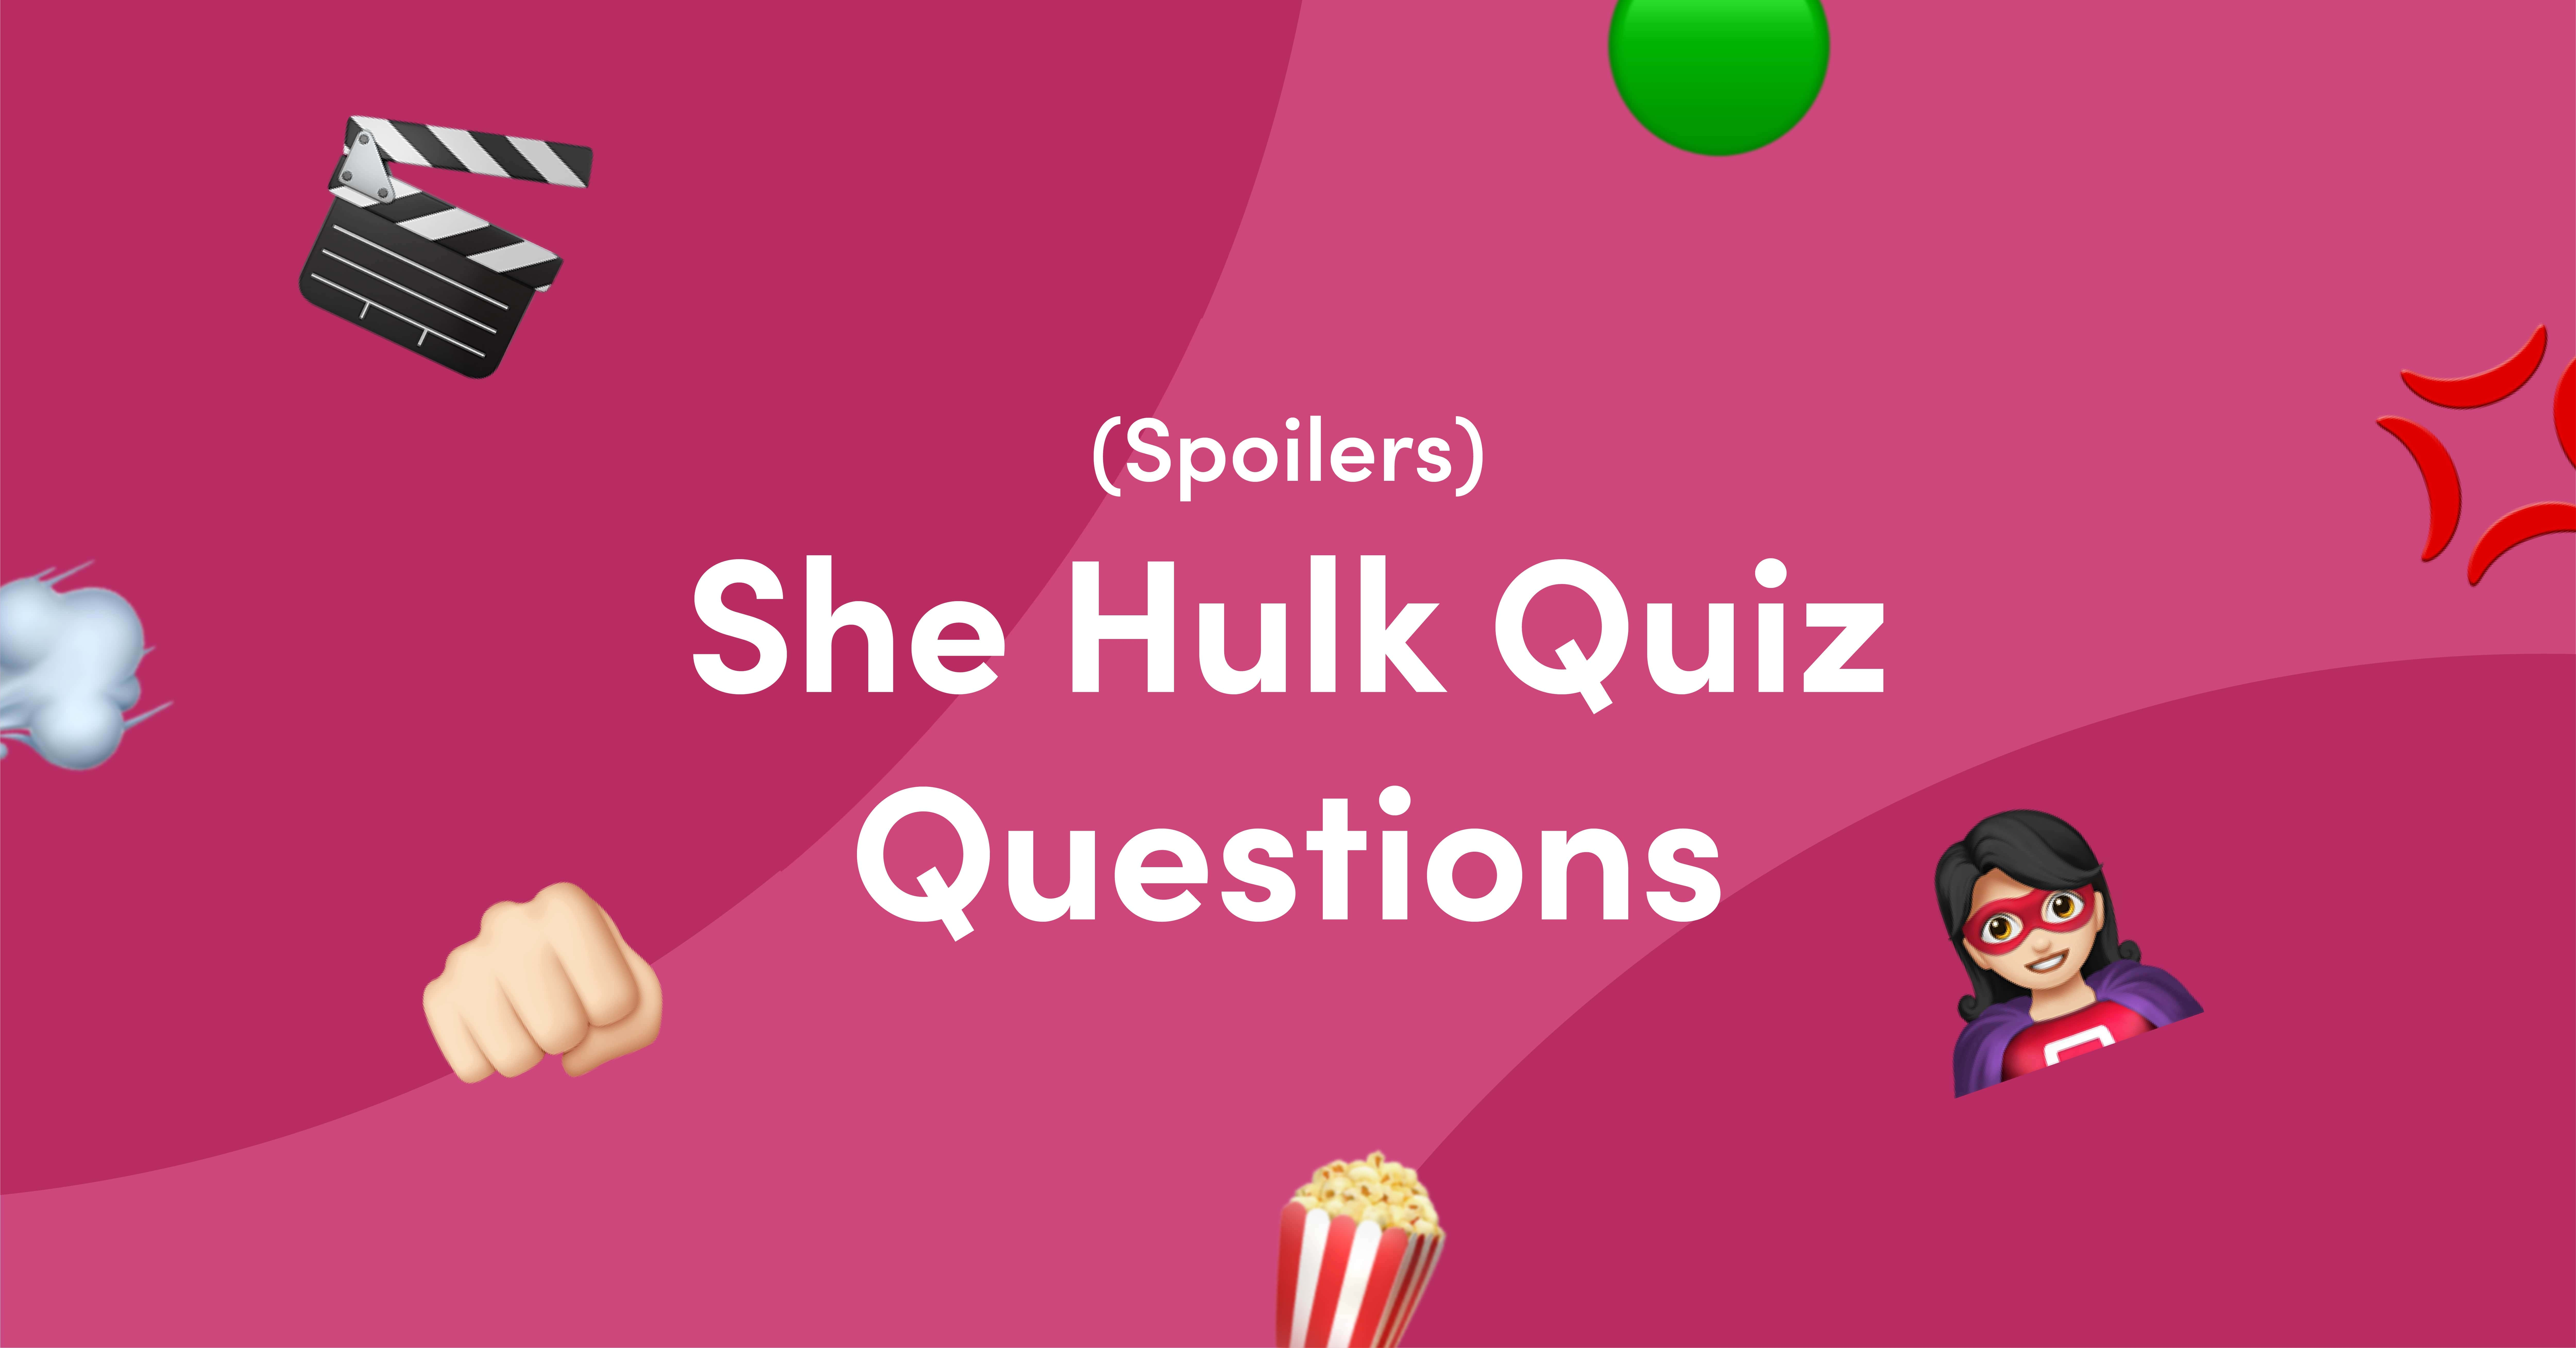 10 She-Hulk Quiz Questions and Answers [Spoilers]